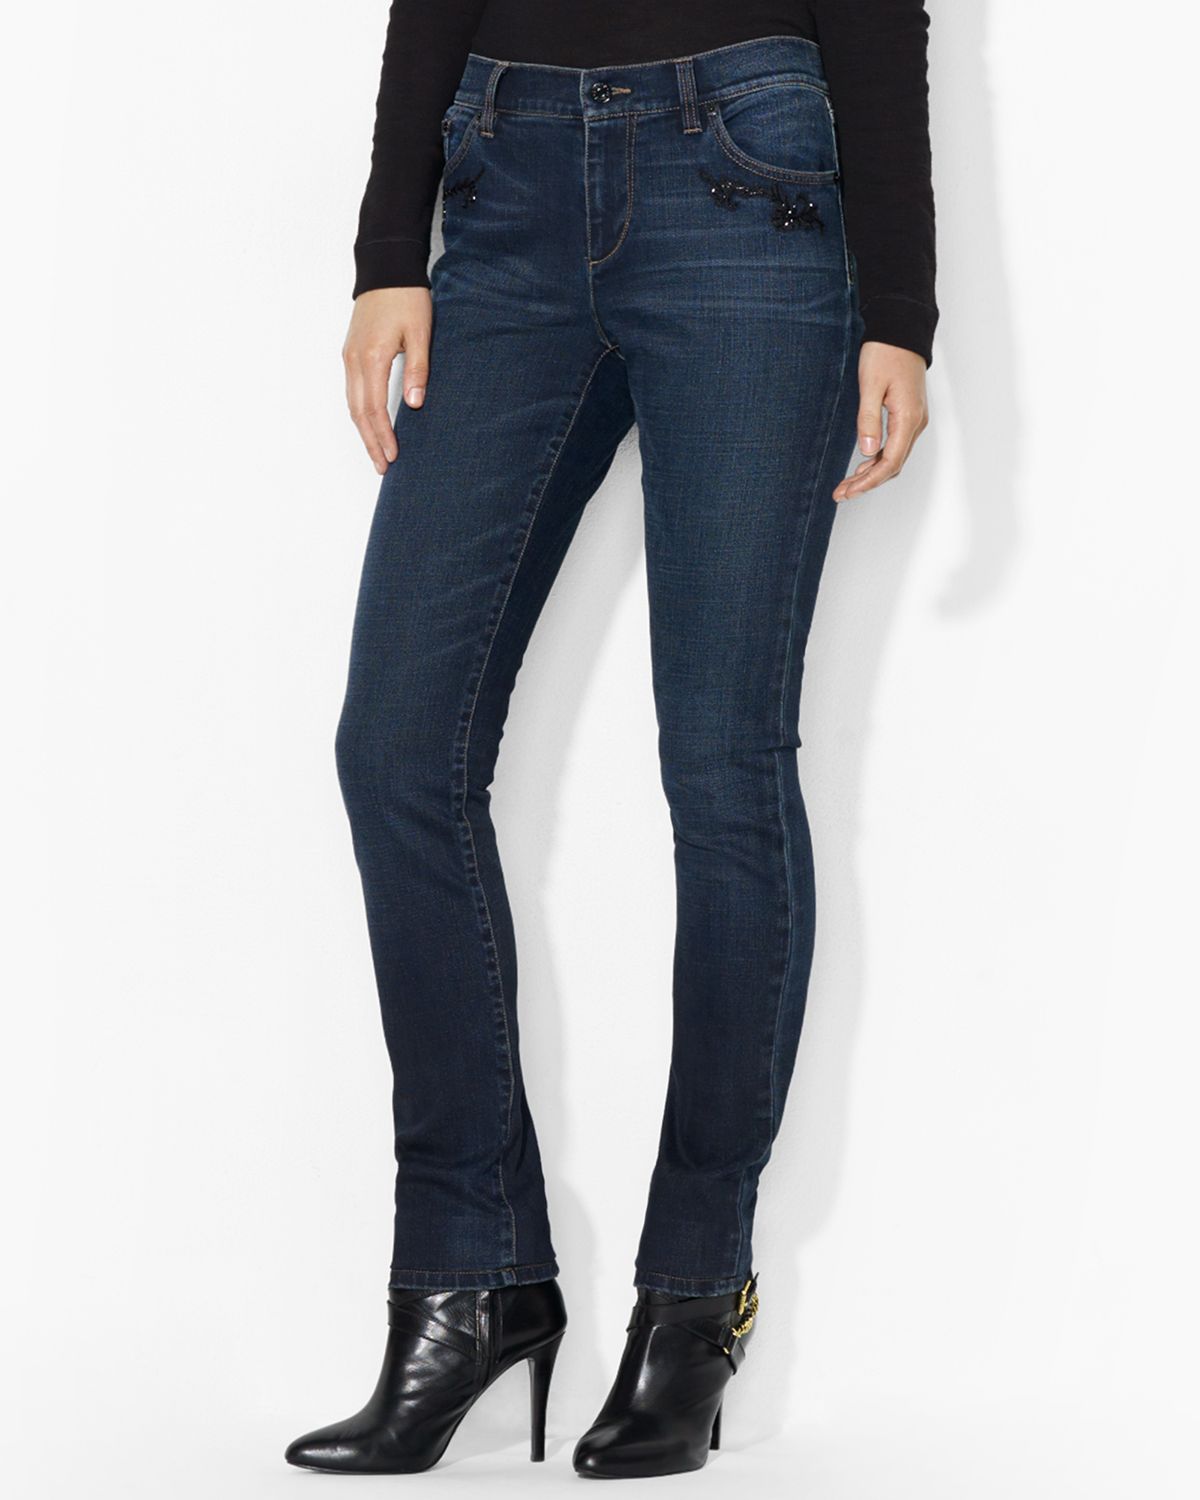 Lyst - Ralph Lauren Modern Skinny Jeans with Beaded Back Pockets in Blue